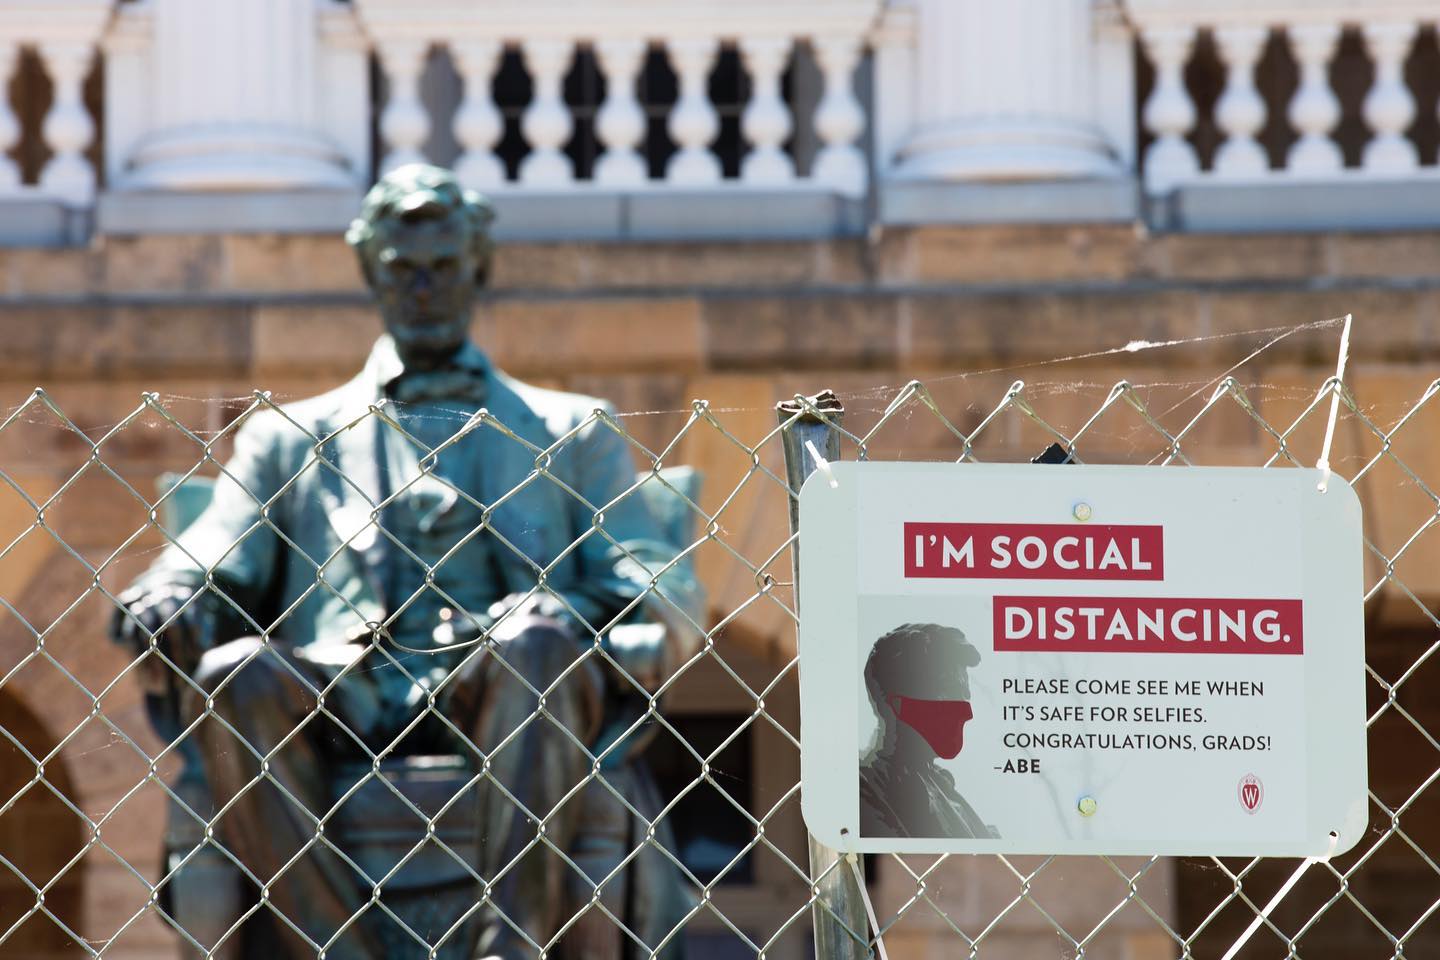 Hung out with Abe from a safe distance this weekend. Bascom Hill is under construction but I thought this was a clever way to promote safe social distancing at the same time on the UW’s part.
.
.
.
.
.
.